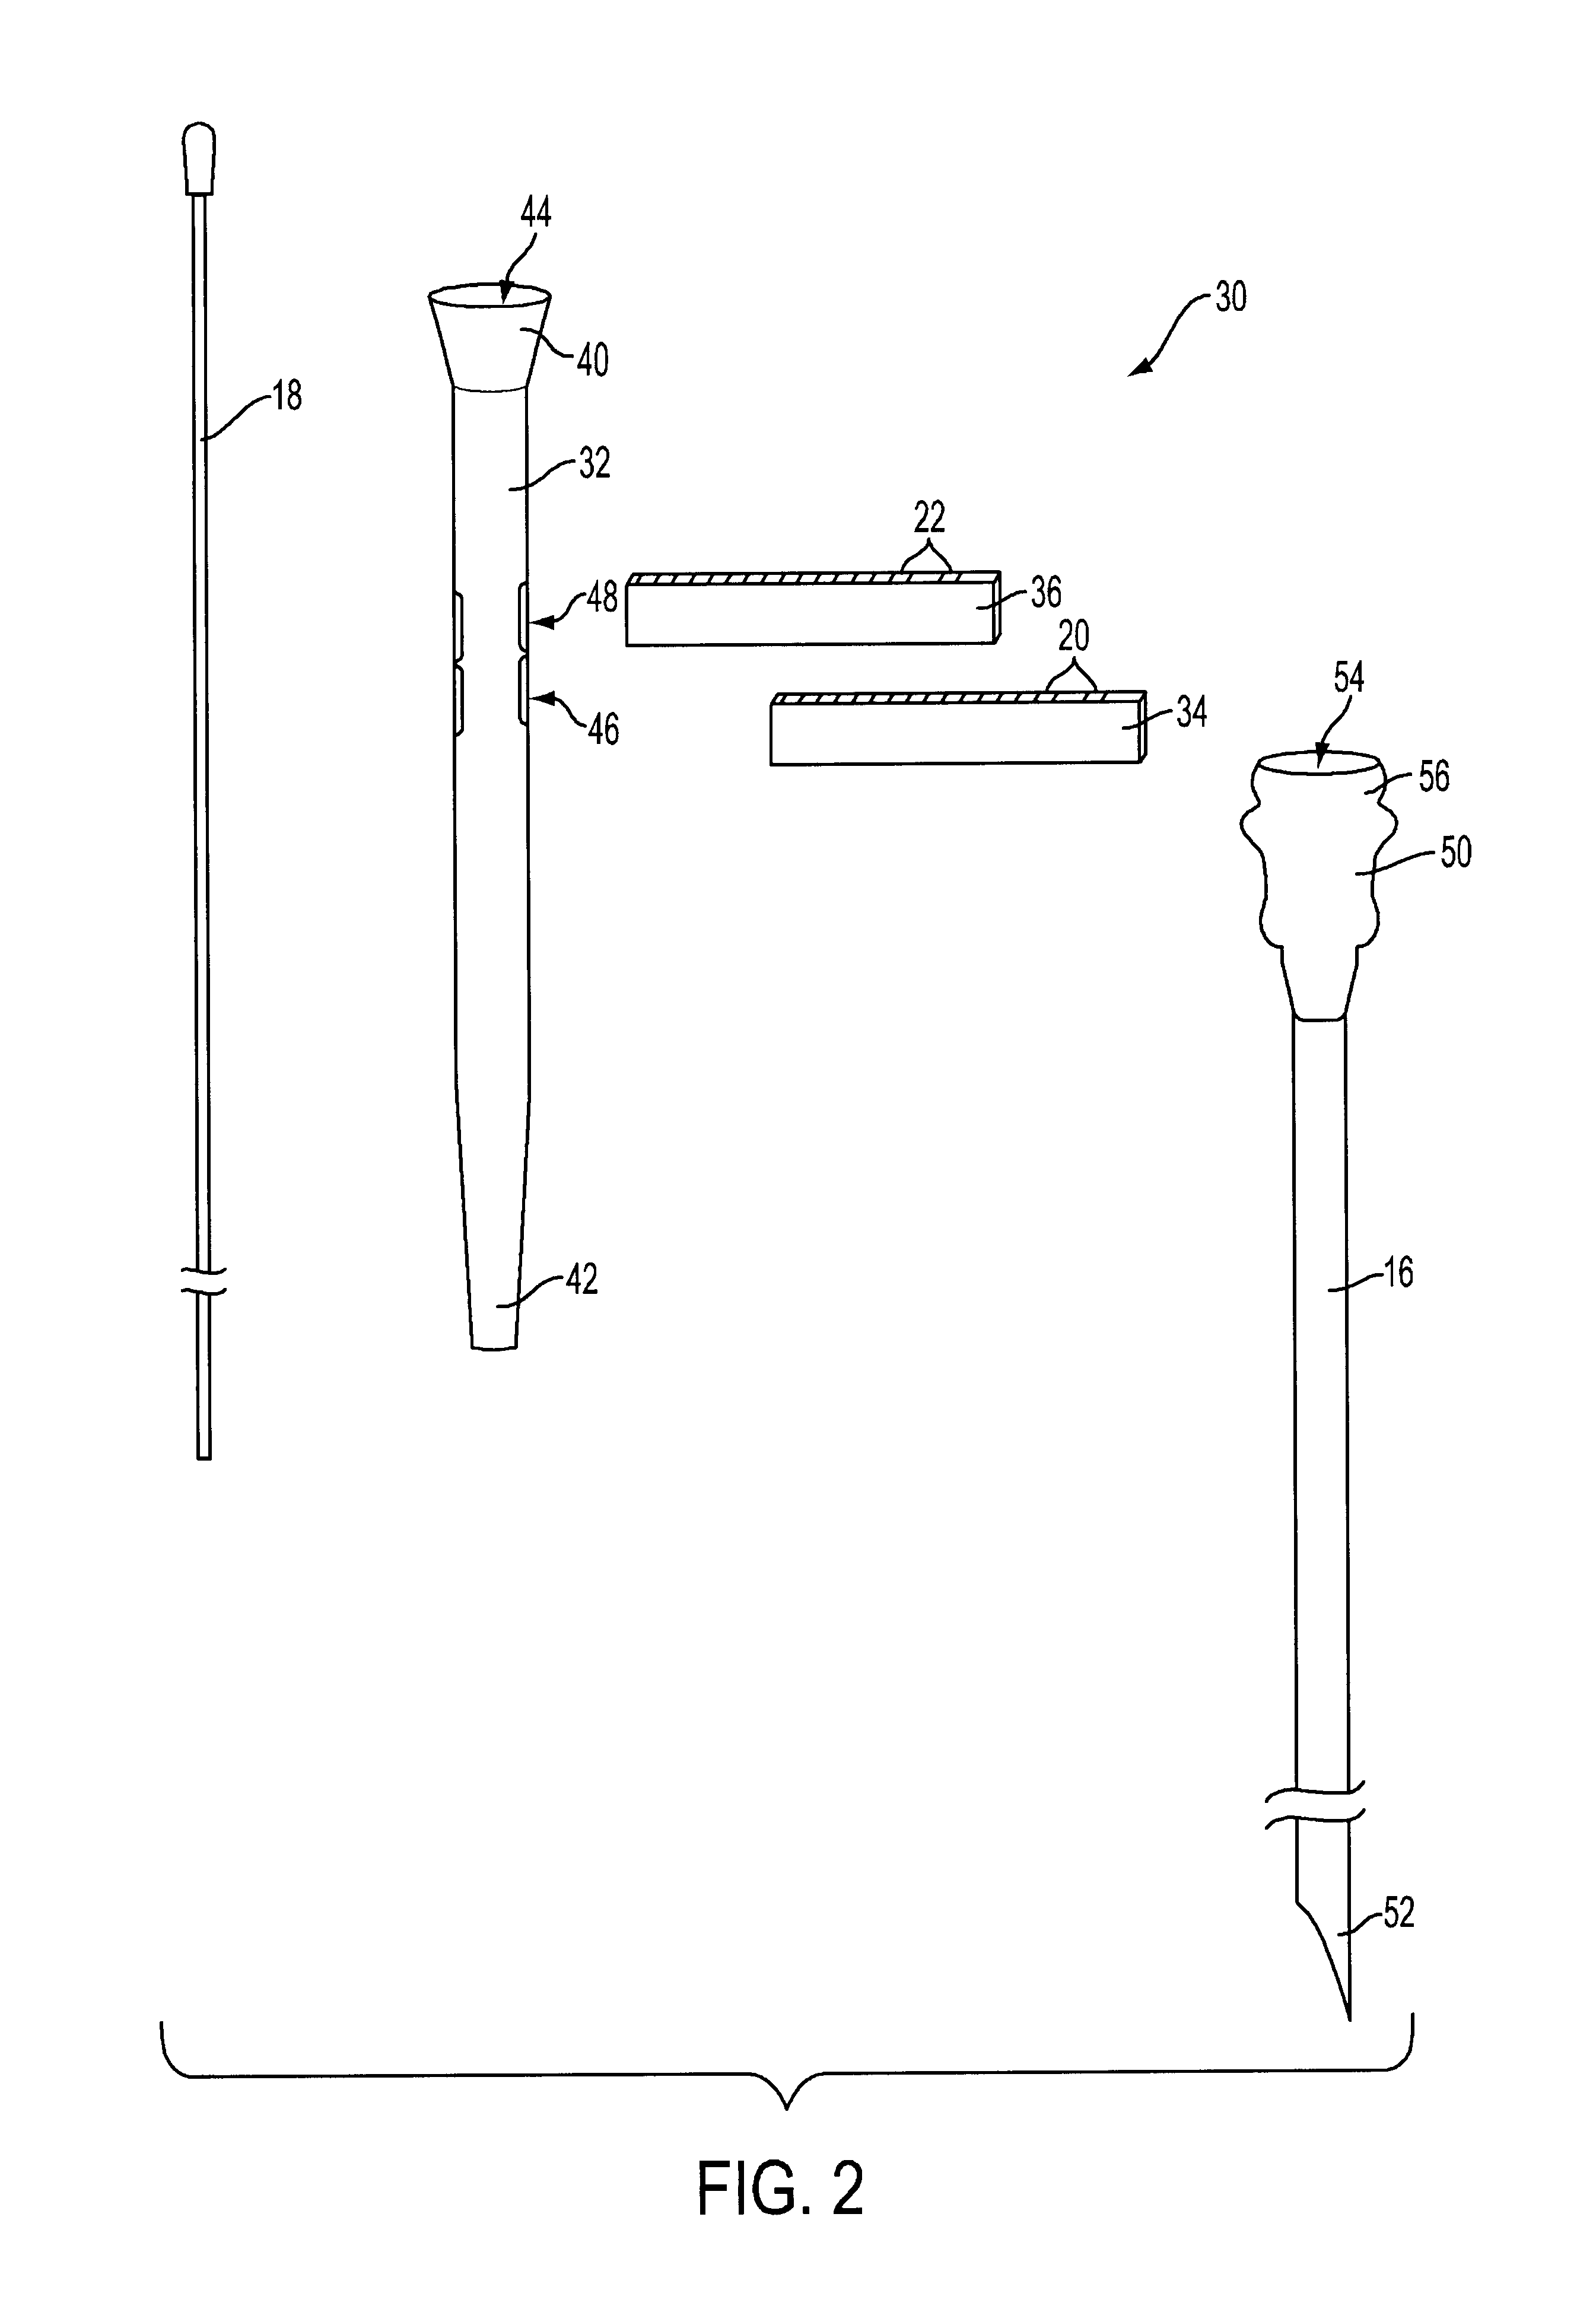 Methods and apparatus for loading radioactive seeds into brachytherapy needles